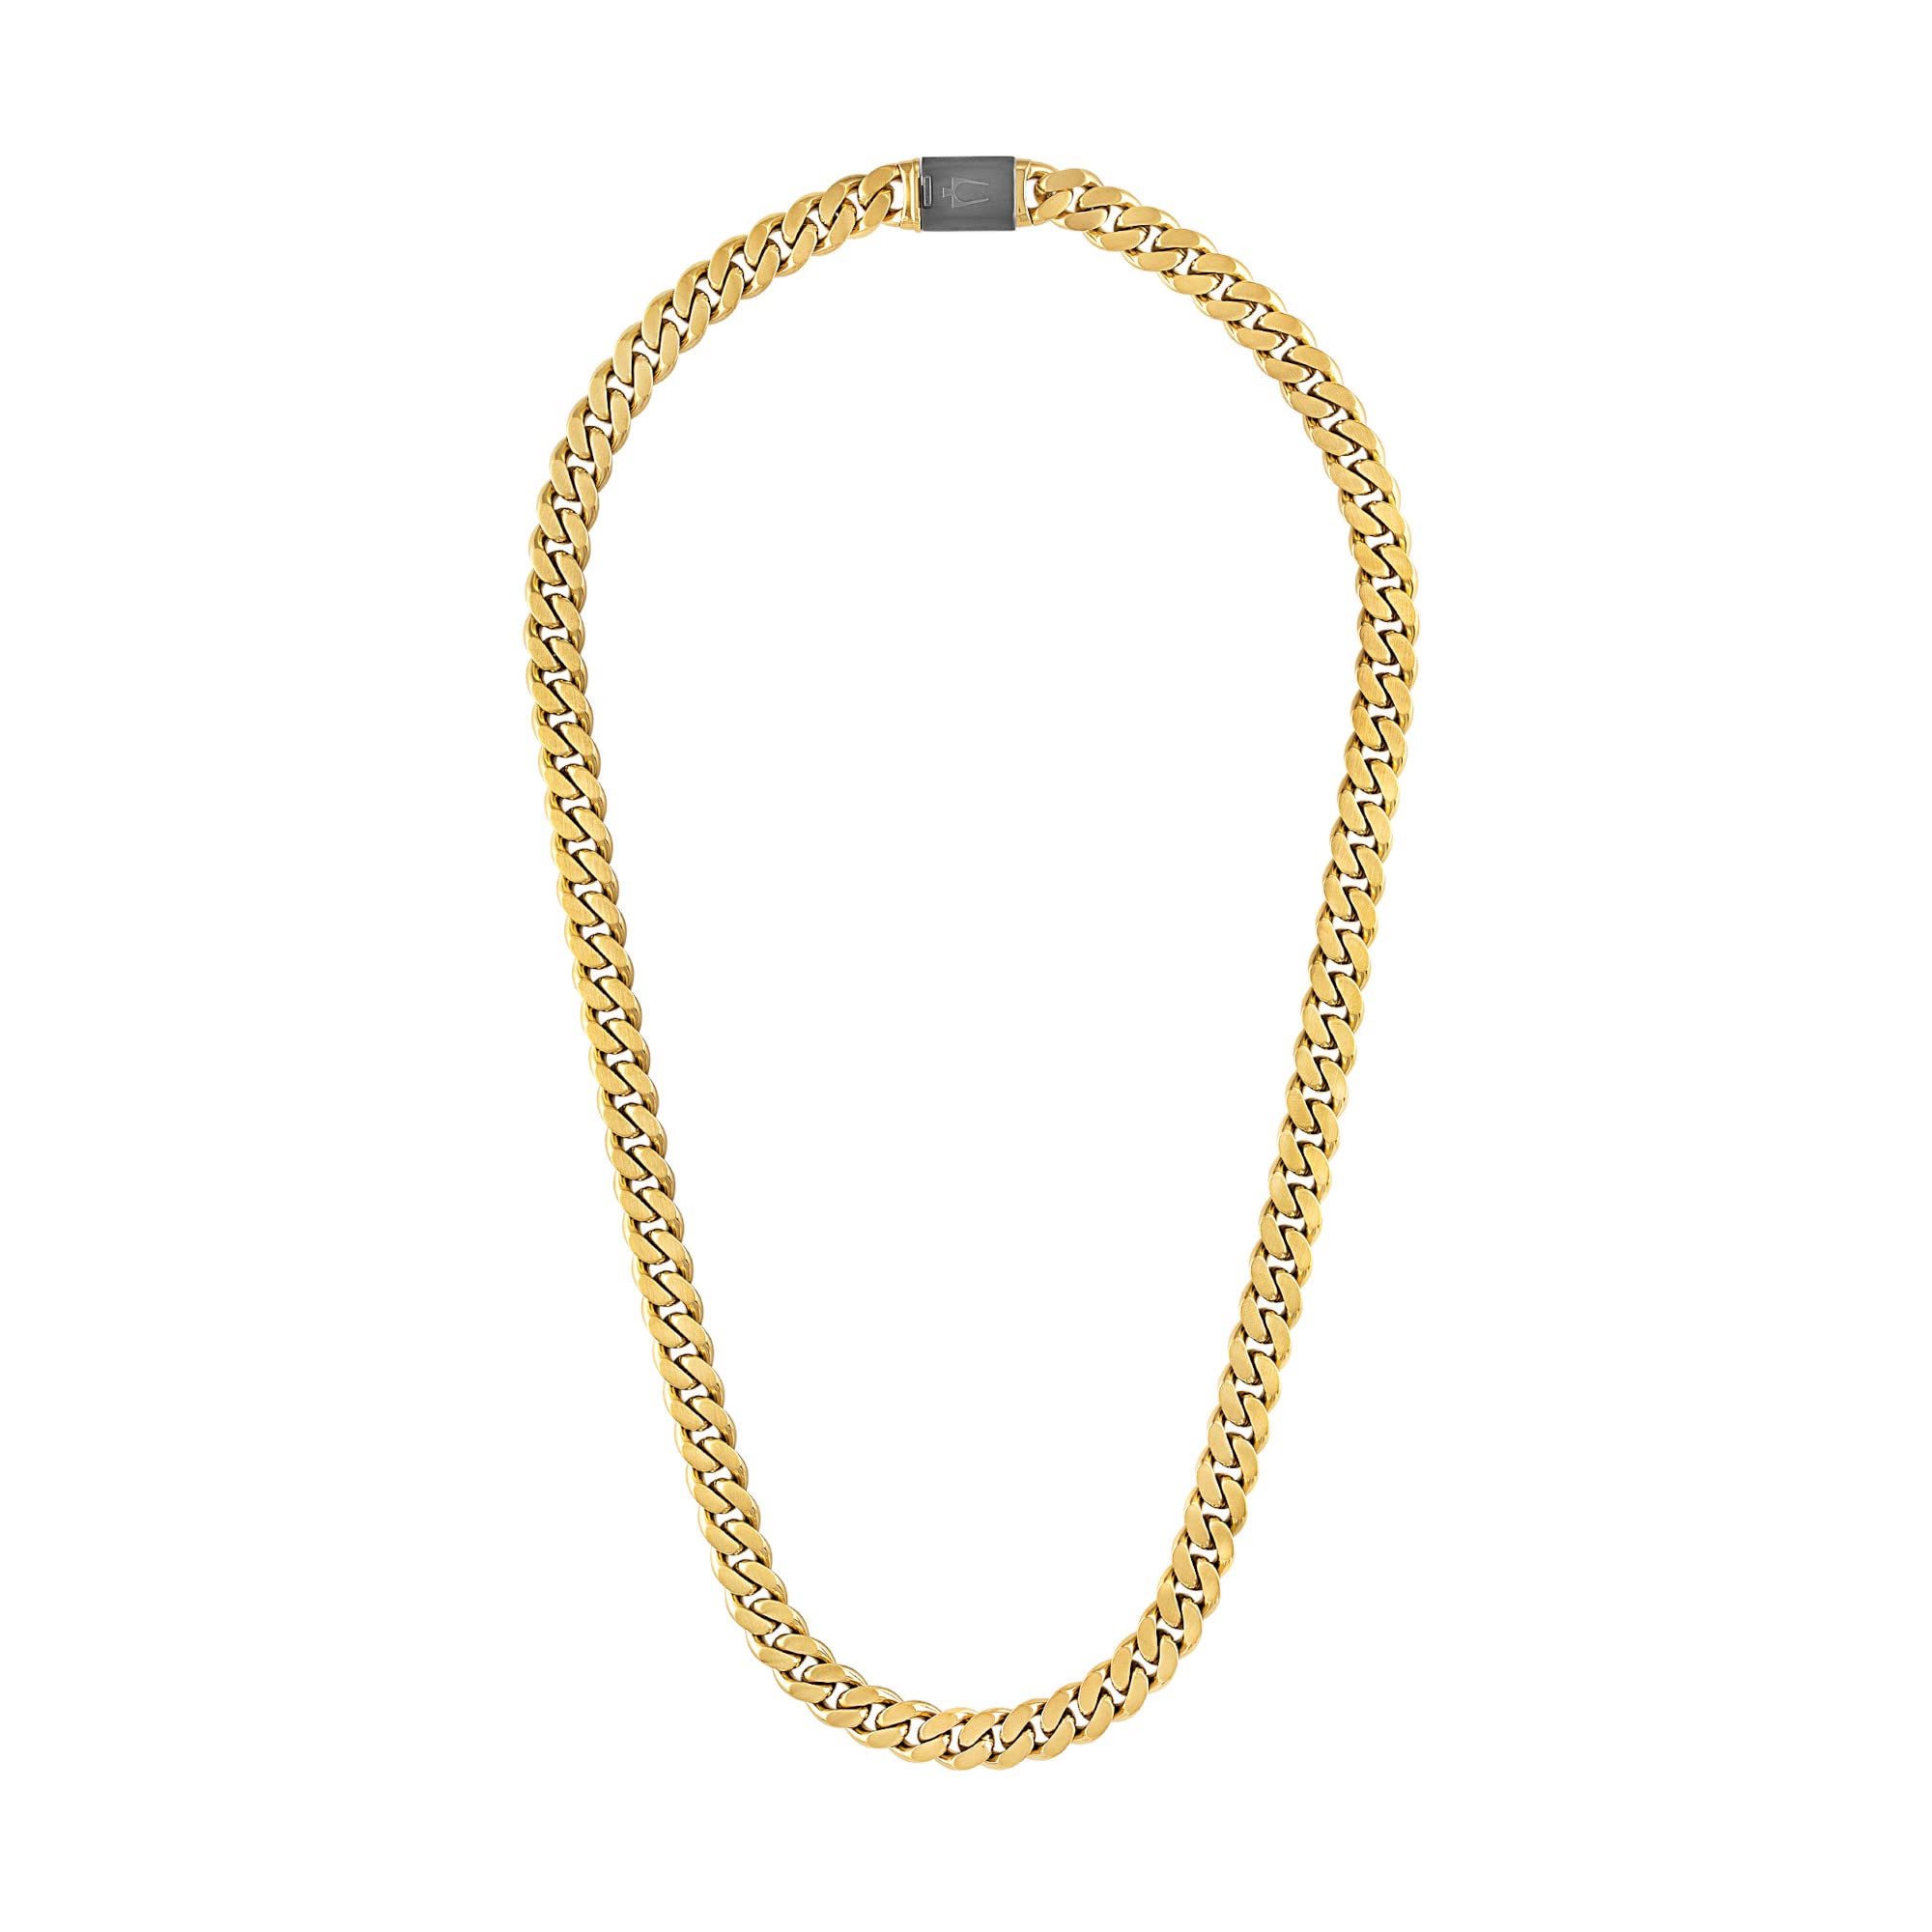 Bulova Men's Jewelry Classic Gold Tone Stainless Steel Curb Chain Necklace, 10mm, Length 24